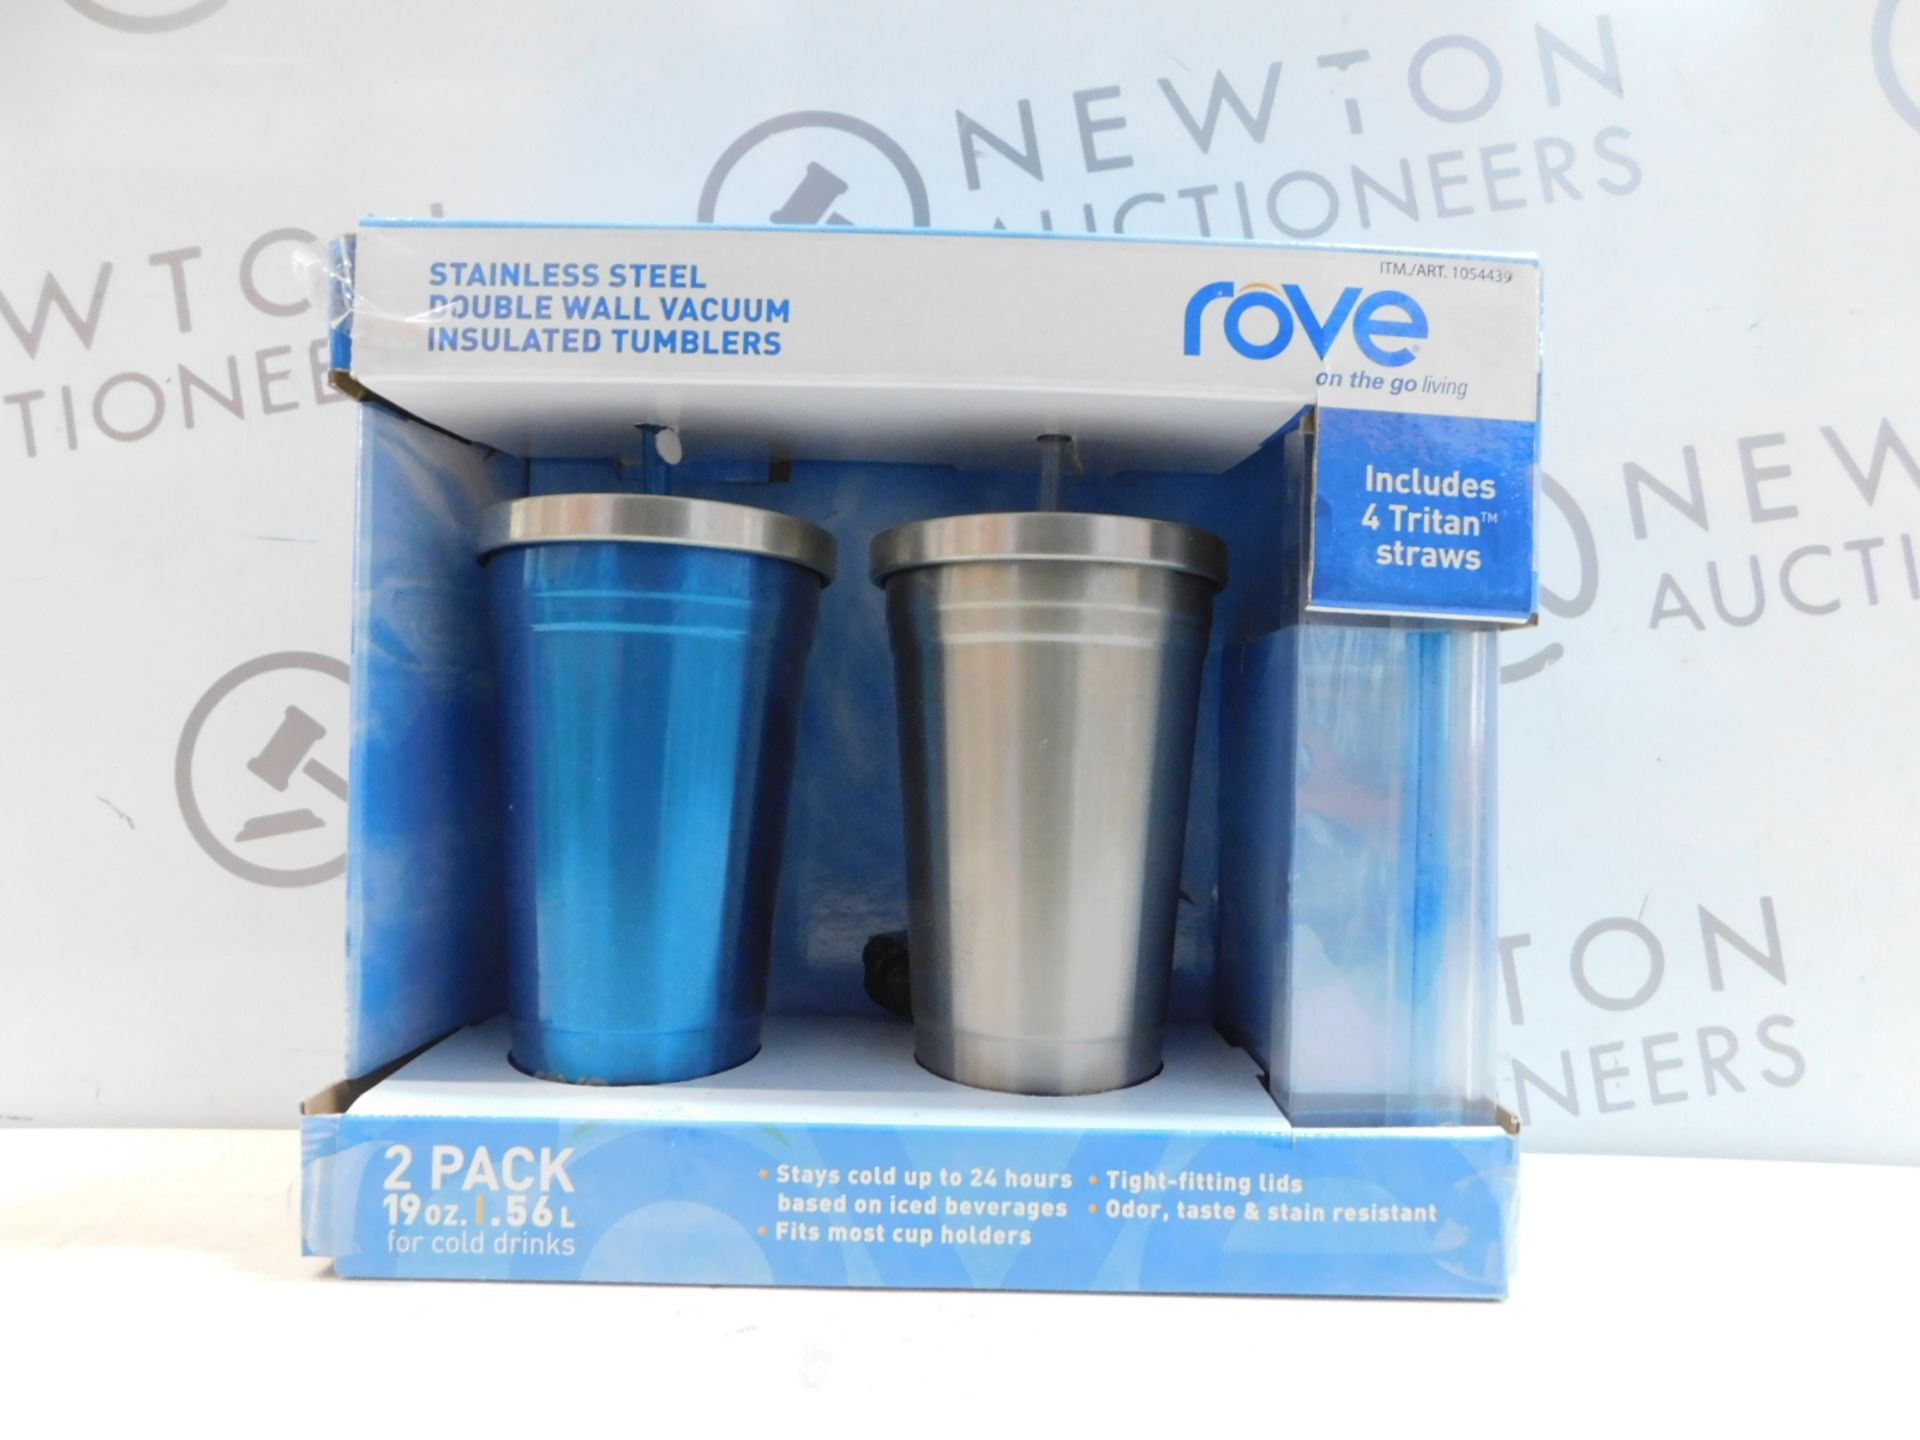 1 BRAND NEW BOX OF 2 ROVE STAINLESS STEEL DOUBLE WALL VACUUM INSULATED TUMBLERS WITH STRAWS RRP Â£